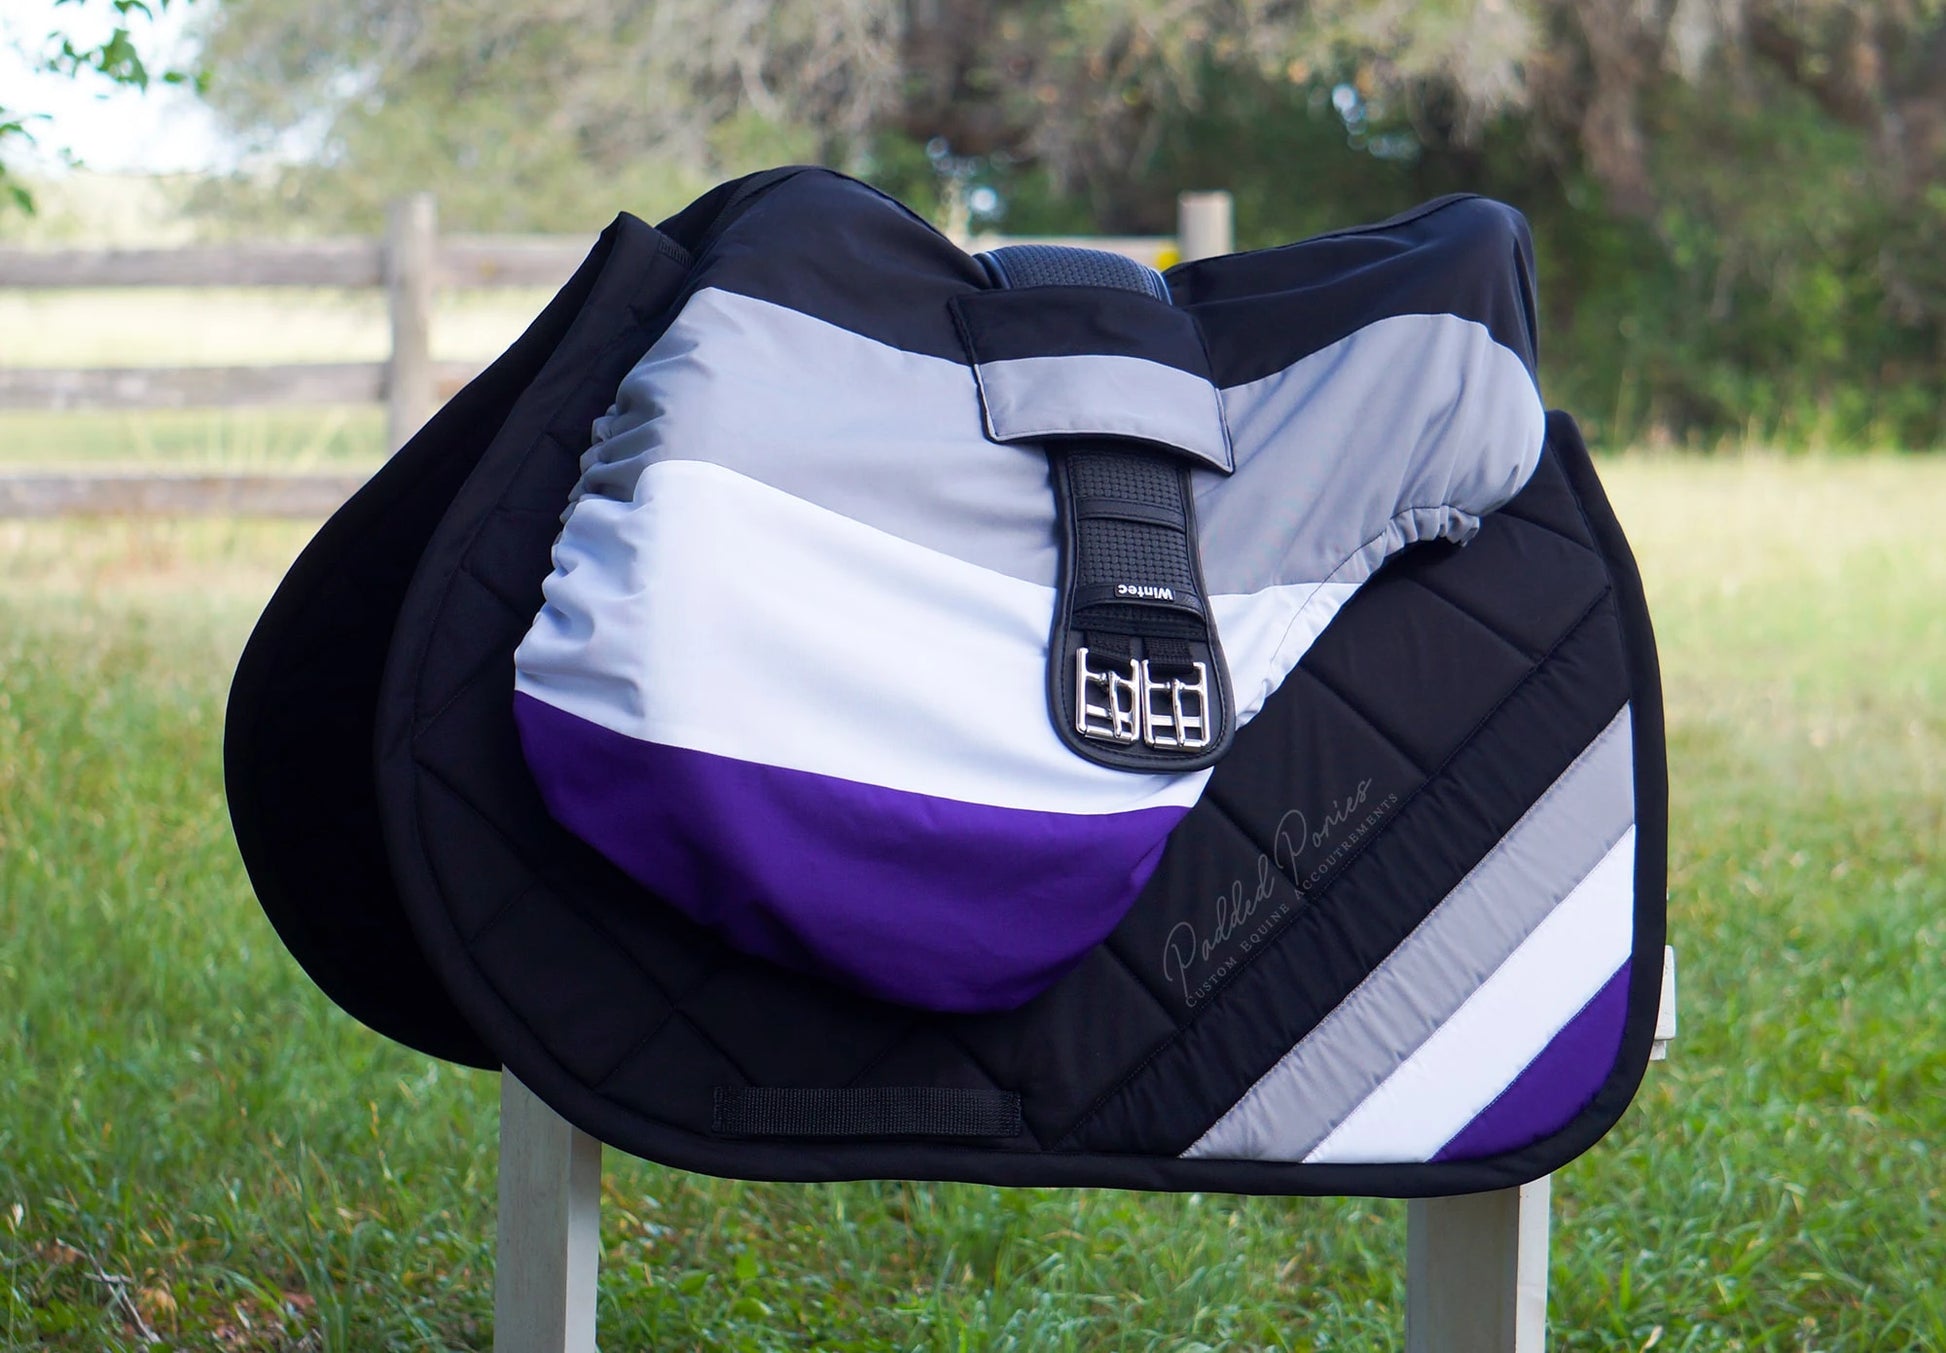 LGBTQ+ Asexual Flag All Purpose Saddle Cover with Girth Holder Pocket and Matching Saddle Pad